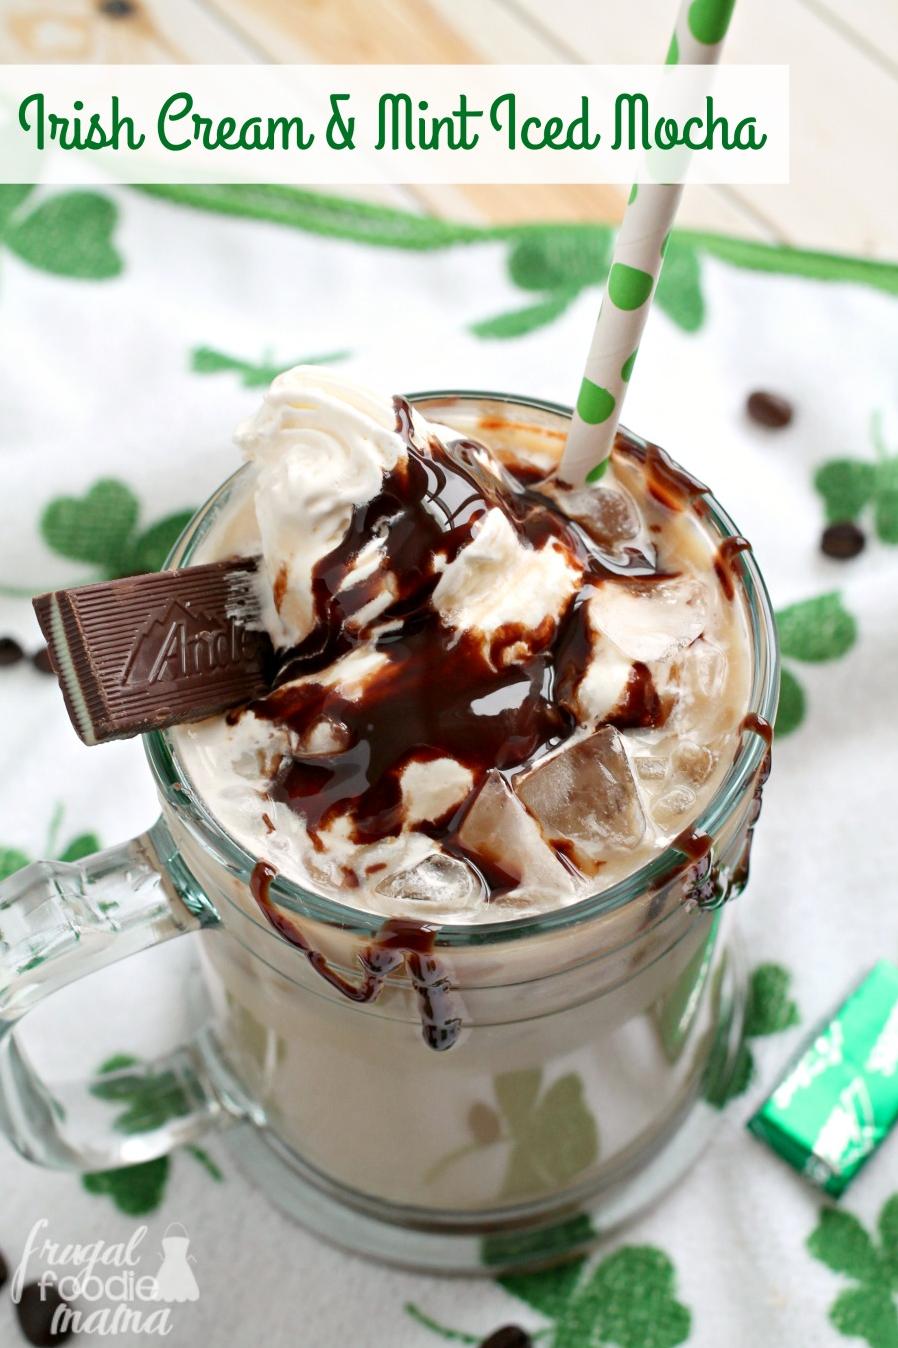  Satisfy your sweet tooth without the guilt with the natural sweetness of our Mint Cream Coffee.